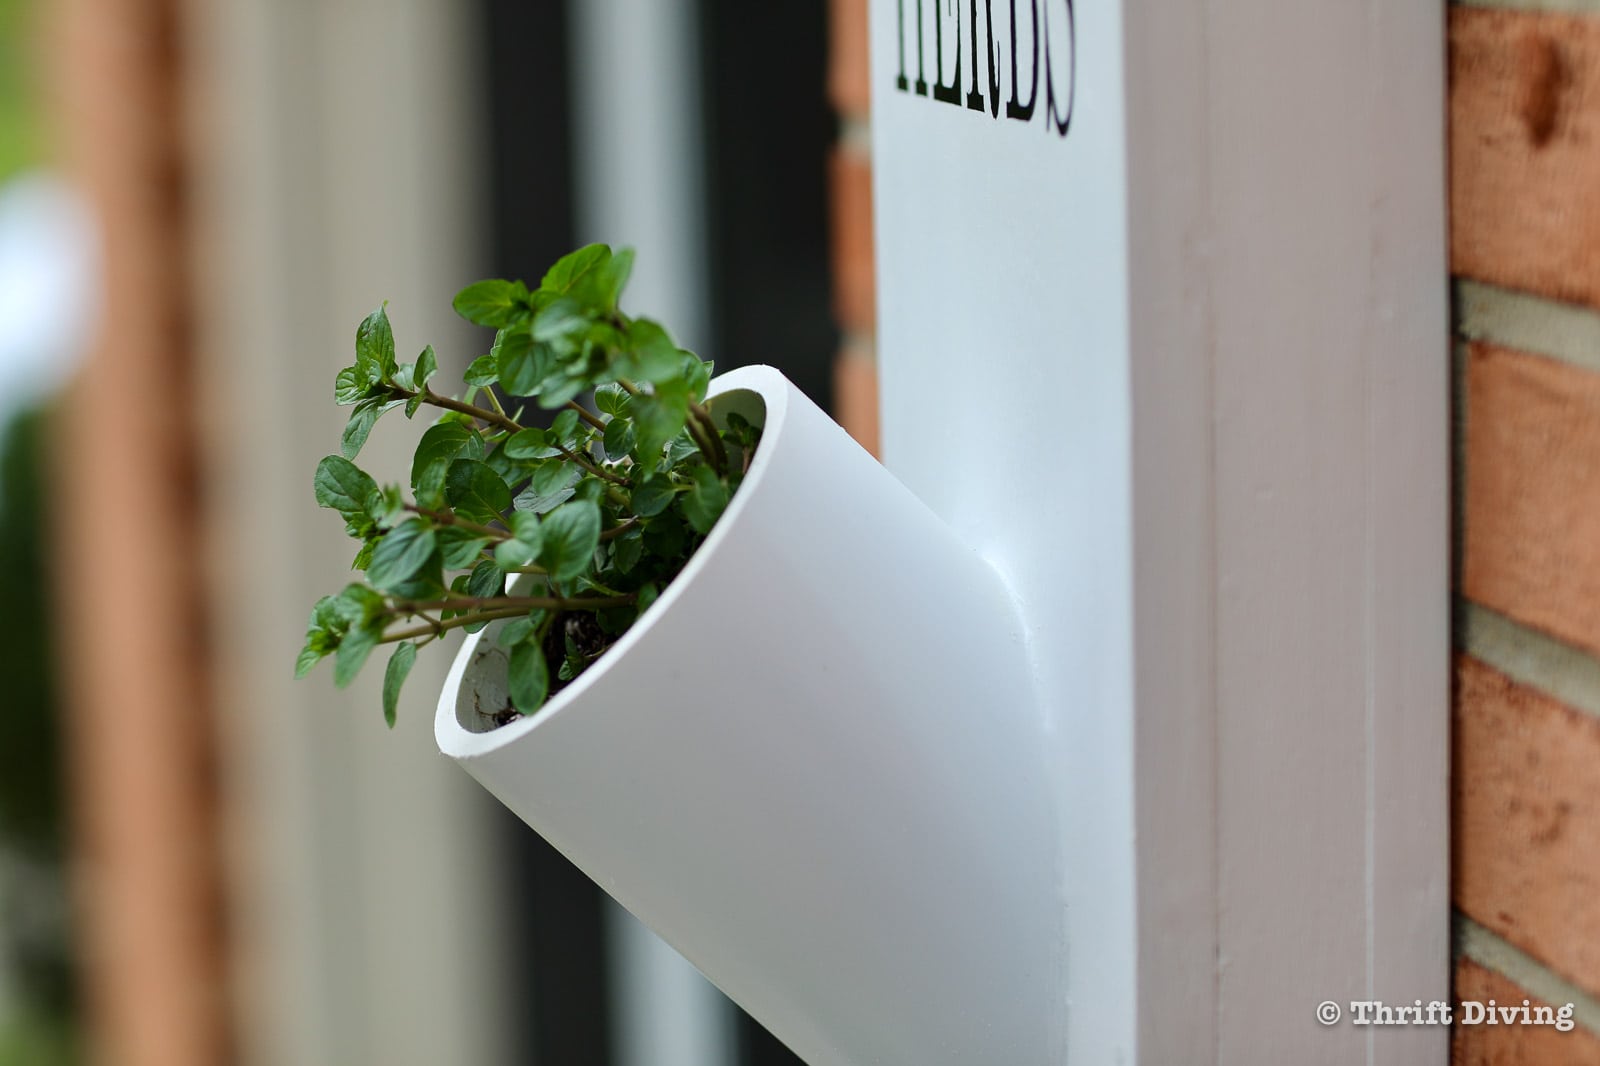 How to Make an Herb Garden Planter Using PVC Piping - Thrift Diving Blog